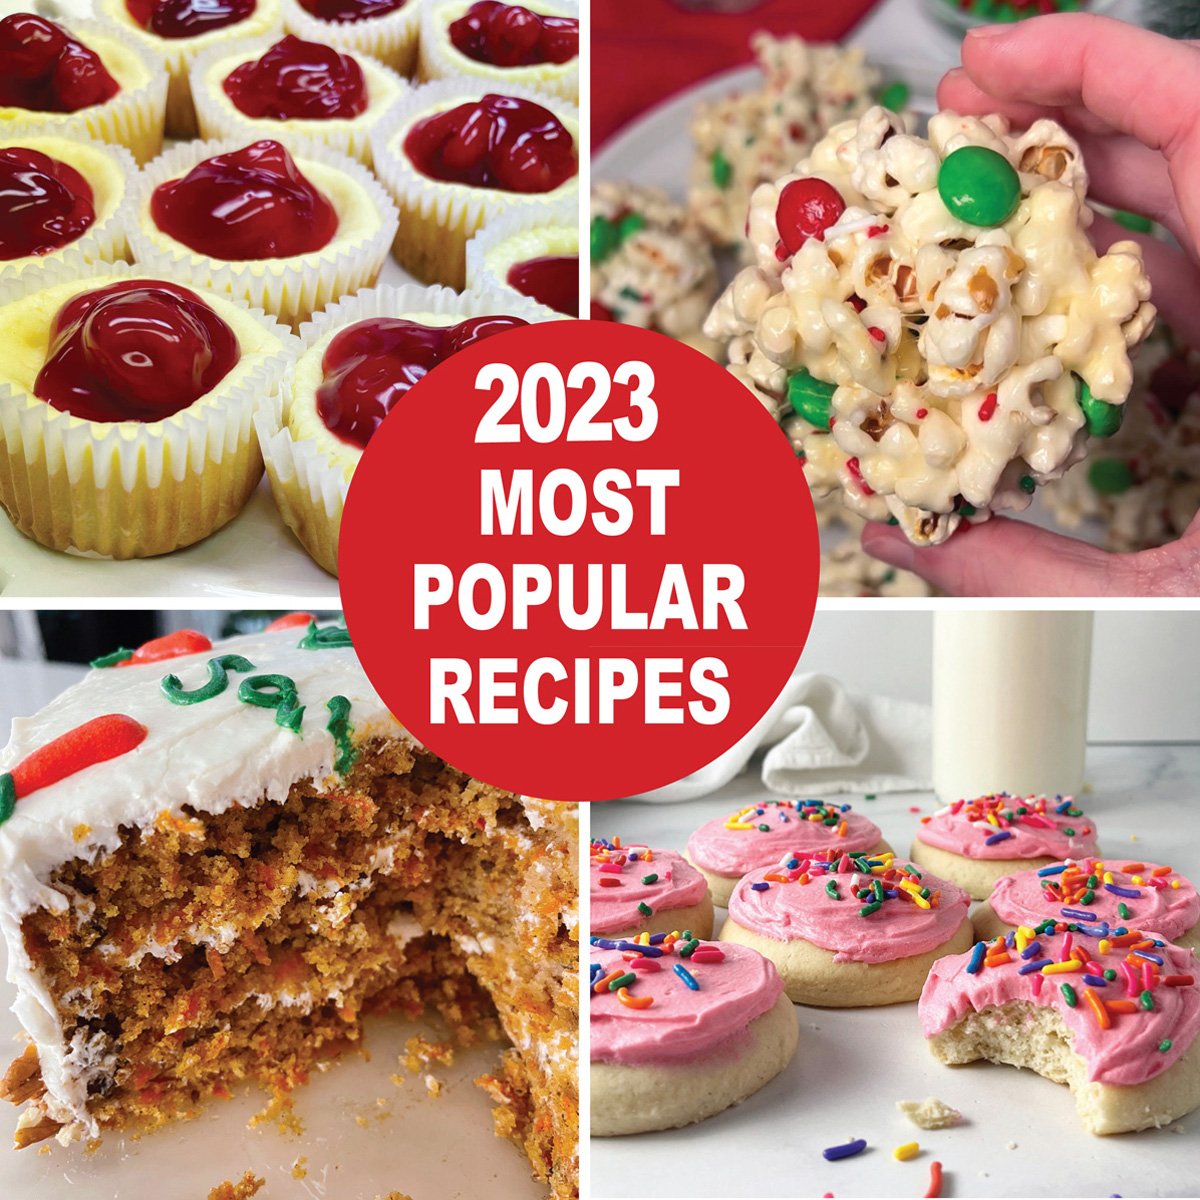 The most popular recipes of 2023 on the blog.